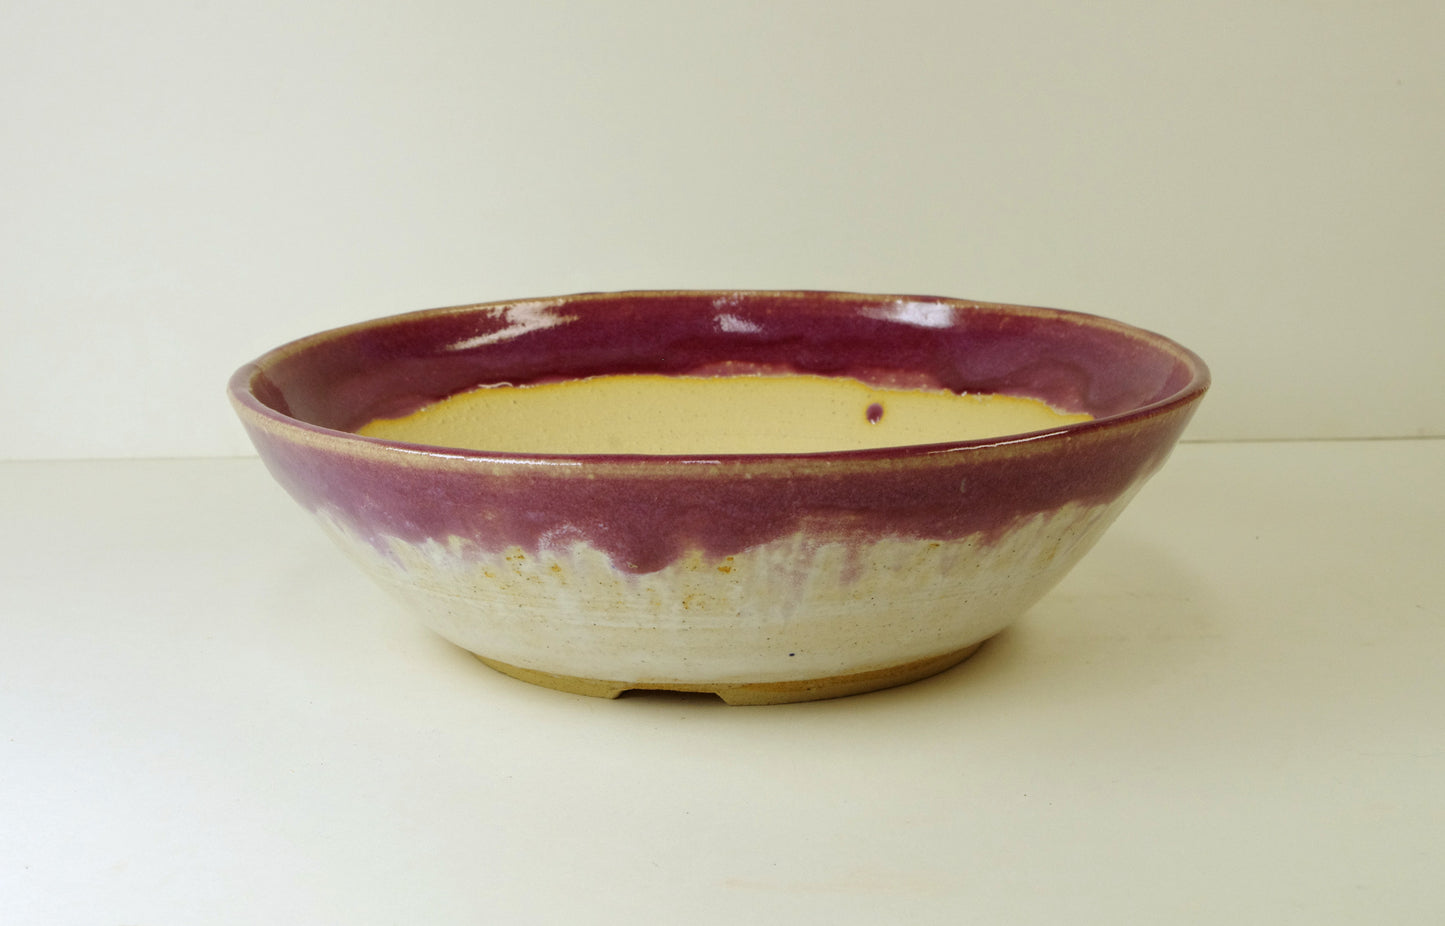 12105, Hand Thrown Stoneware Bonsai Pot, With Extra Wire Holes, light red-purple, 8 1/4 x 2 3/8